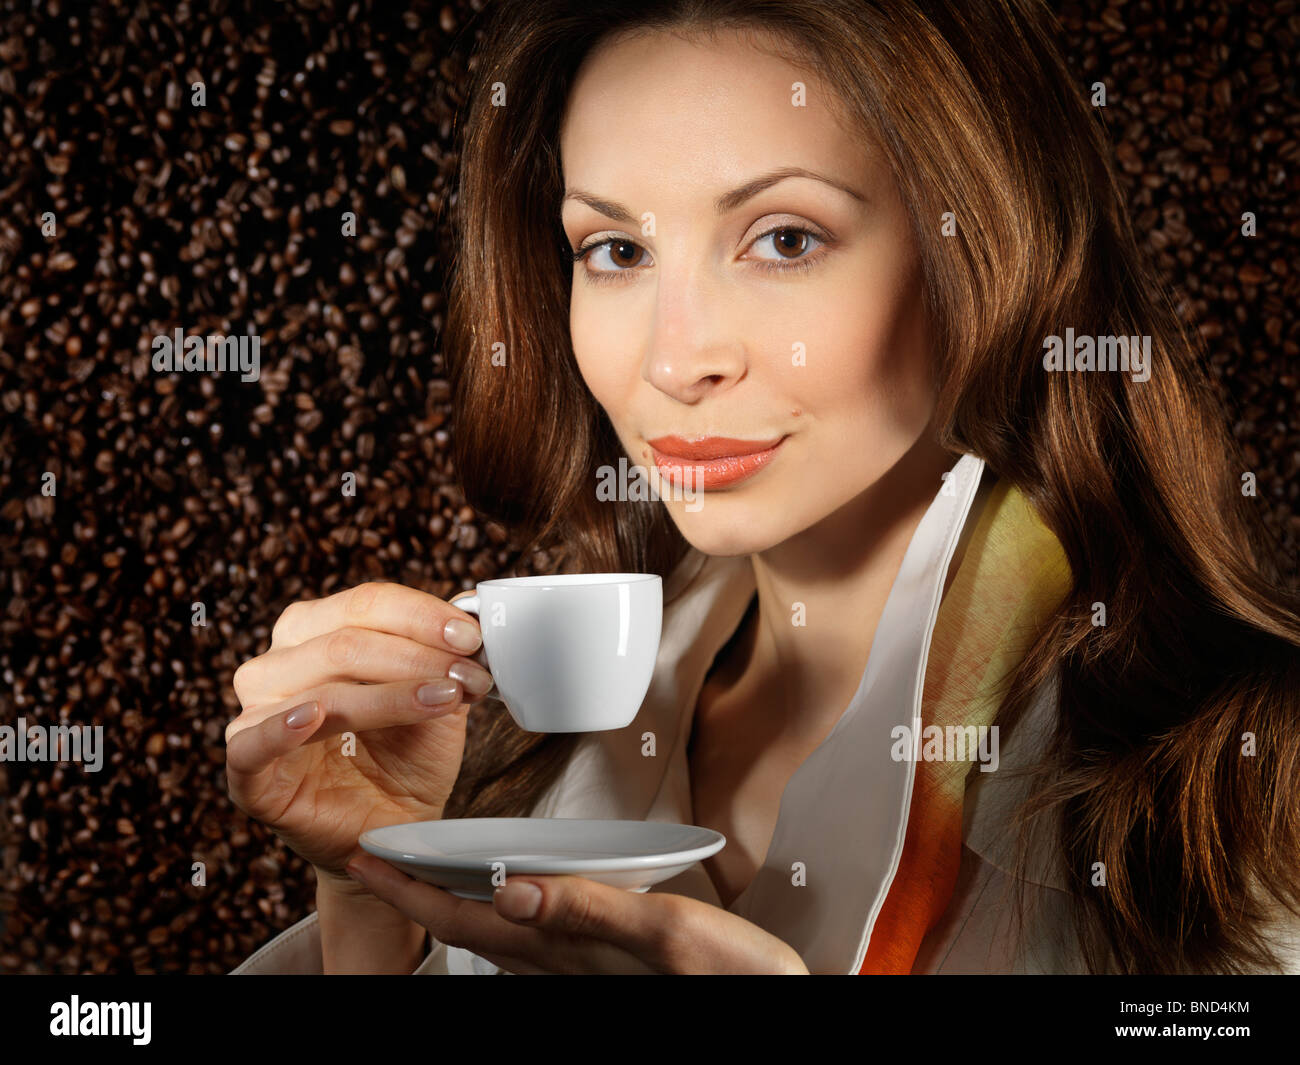 Beautiful young woman holding a cup of coffee with coffee beans background behind her Stock Photo